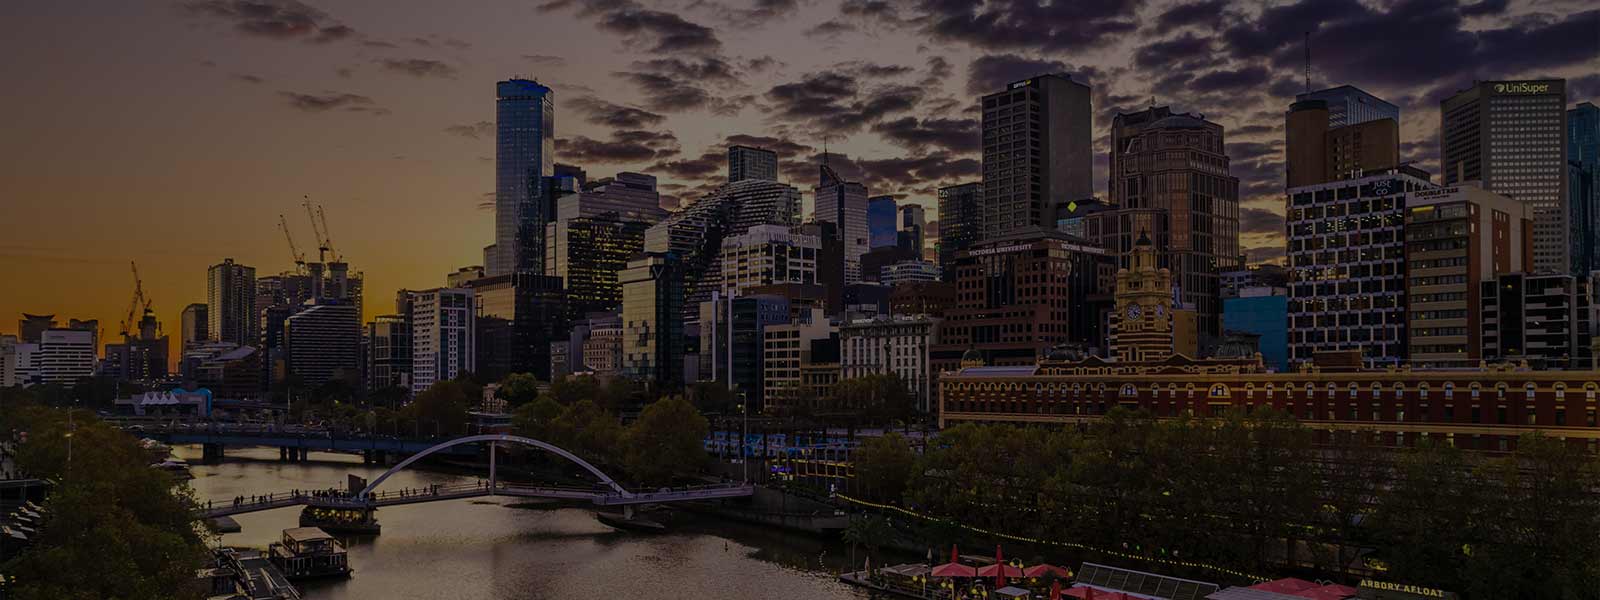 A view down the Yarra River of  Melbourne’s Southbank Cityscape during ‘golden hour’ when the sky is purple and orange with long dark grey clouds. 